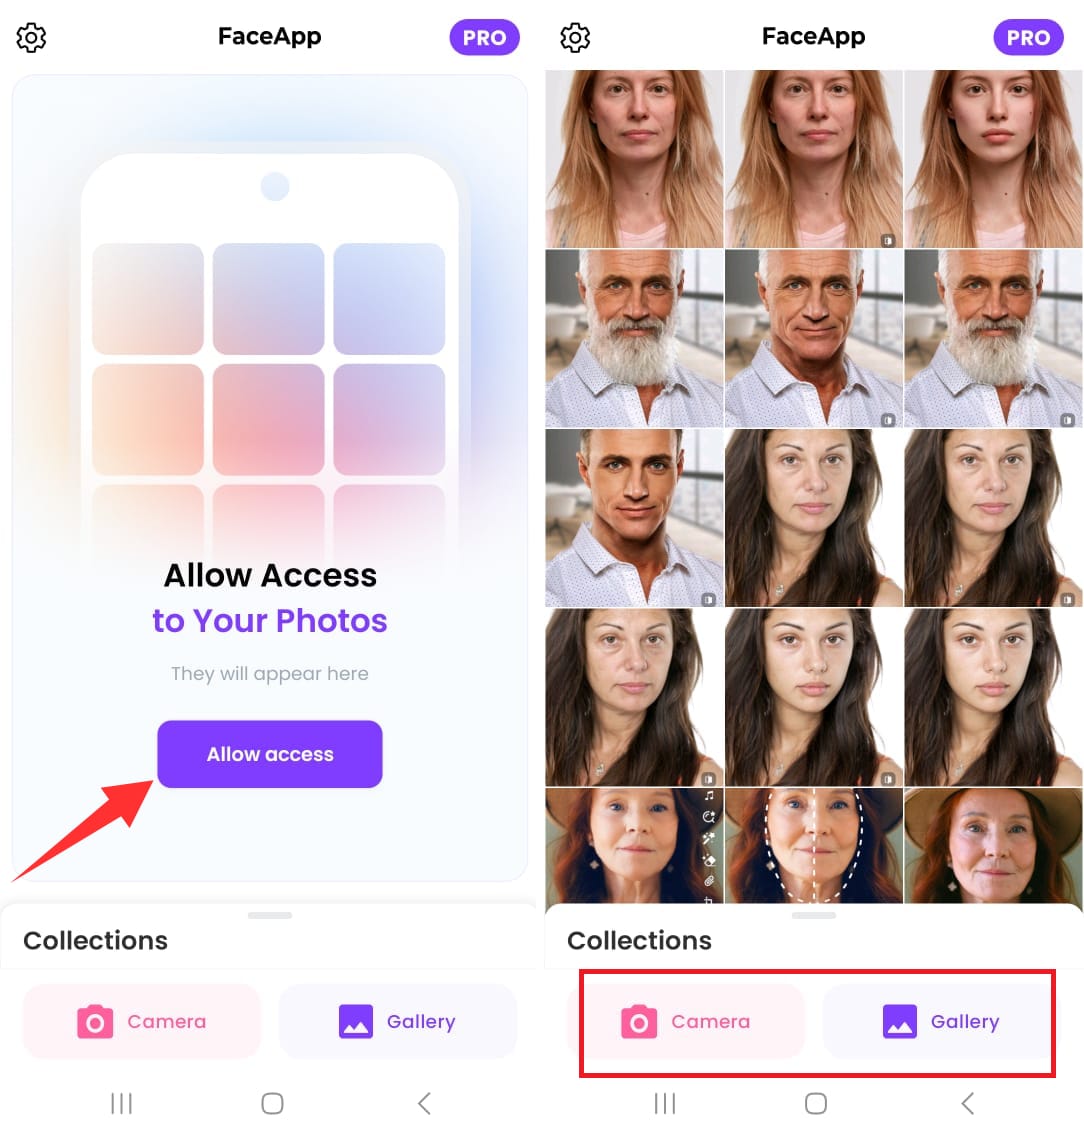 allow access to upload images.